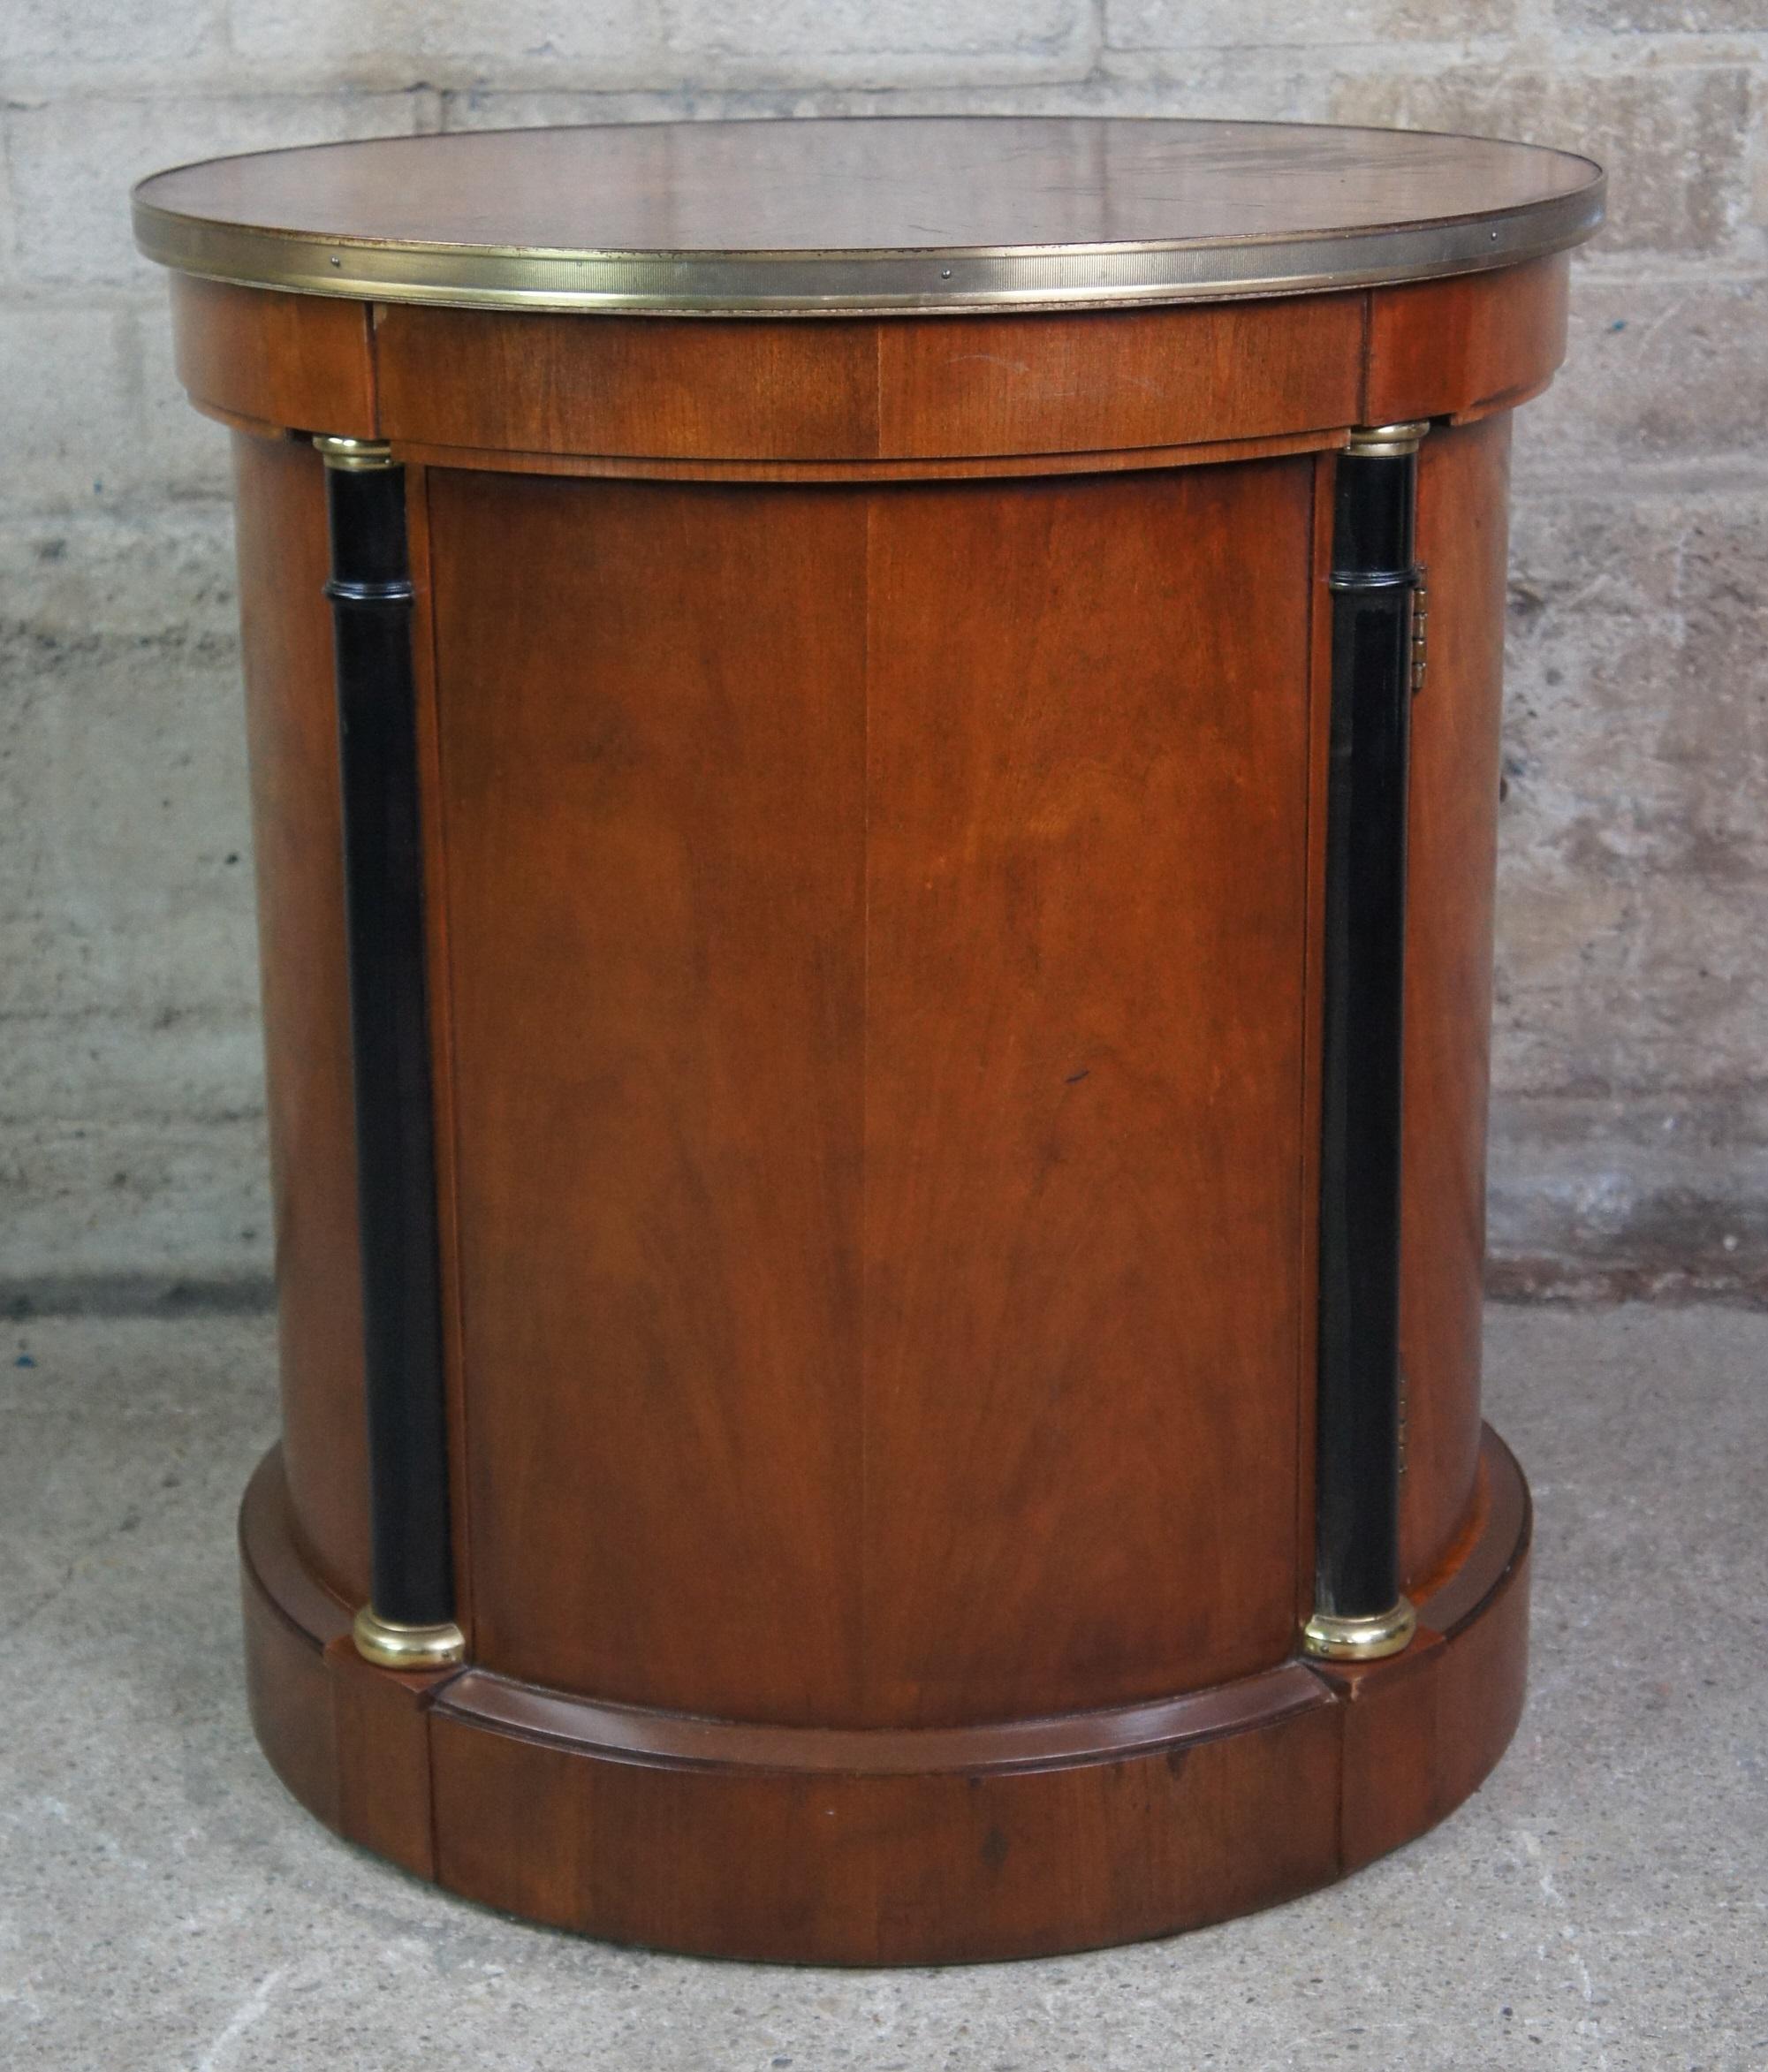 20th Century Neoclassical French Empire Round Cherry Somno Drum Table Nightstand Cabinet Vtg